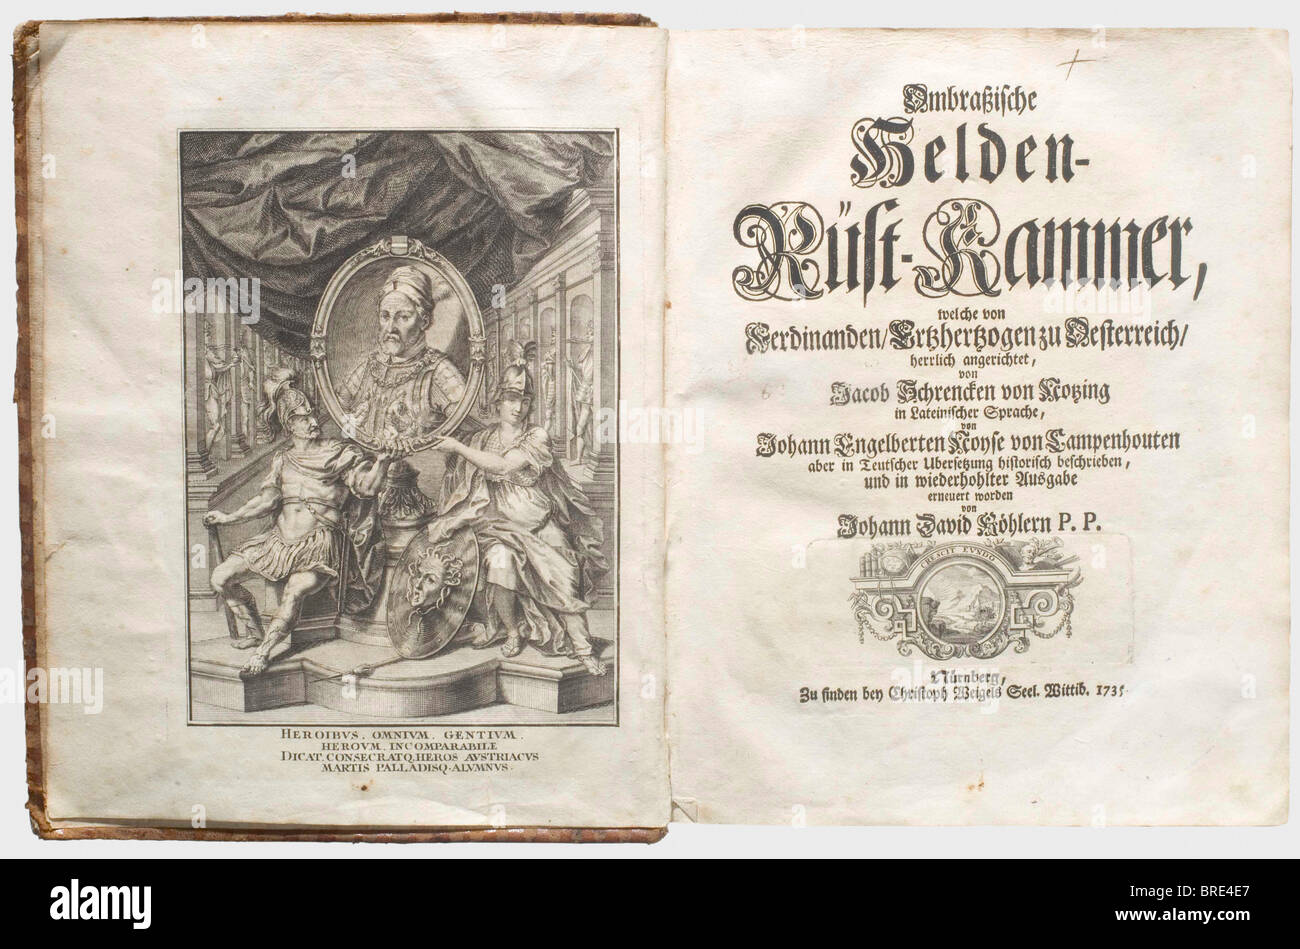 Jakob Schrenck von Notzing (died 1612), Ambrasische Helden-Rüstkammer, Nuremberg 1735 Reduced edition by Johann David Köhler, published by Christoph Weigel in Nuremberg. 26 x 21.5 cm. Leather cover with embossed spine. 448 p., comprehensive index. 125 copper engravings and a frontispiece after Giovanni Battista Fontana's drawings (1541 - 1587). The preliminary copper portraits are succeeded by four-page biographies. The original edition was published in Innsbruck in 1601 and is considered to be the first illustrated and printed museum catalogue of the world. In, Stock Photo